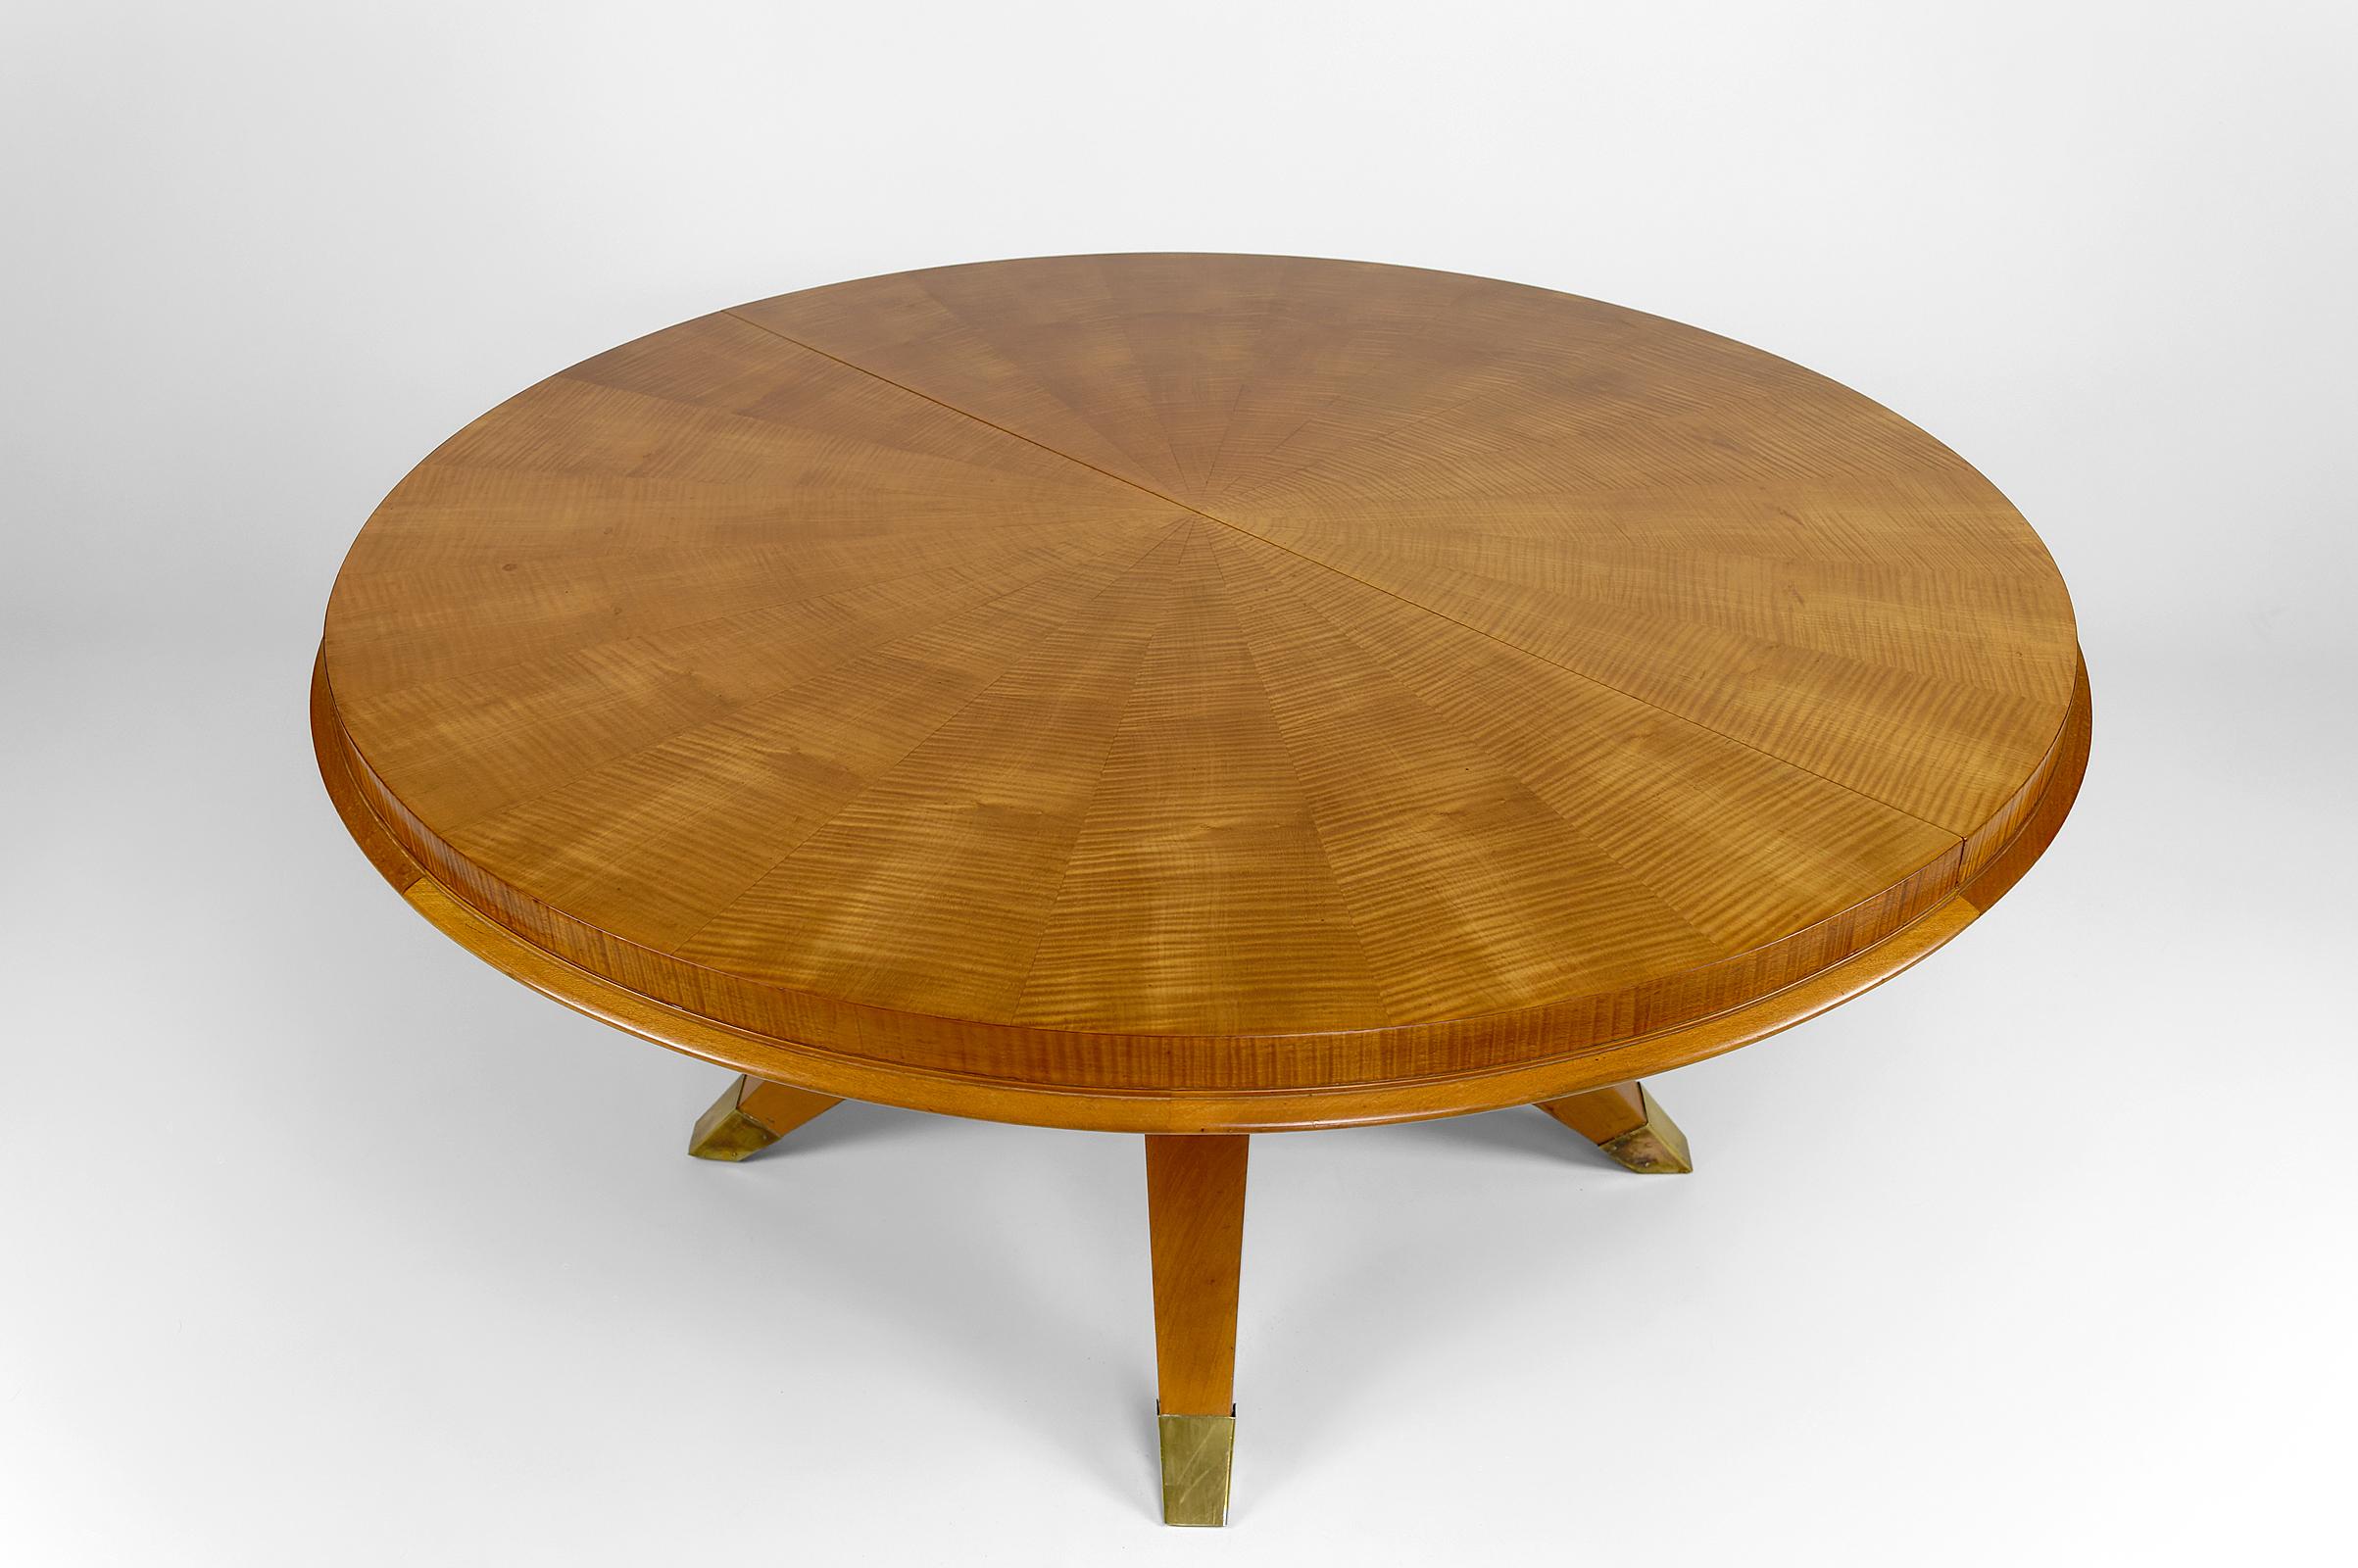 Mid-20th Century Round Art Deco Coffee Table in Maple Wood, France, circa 1940